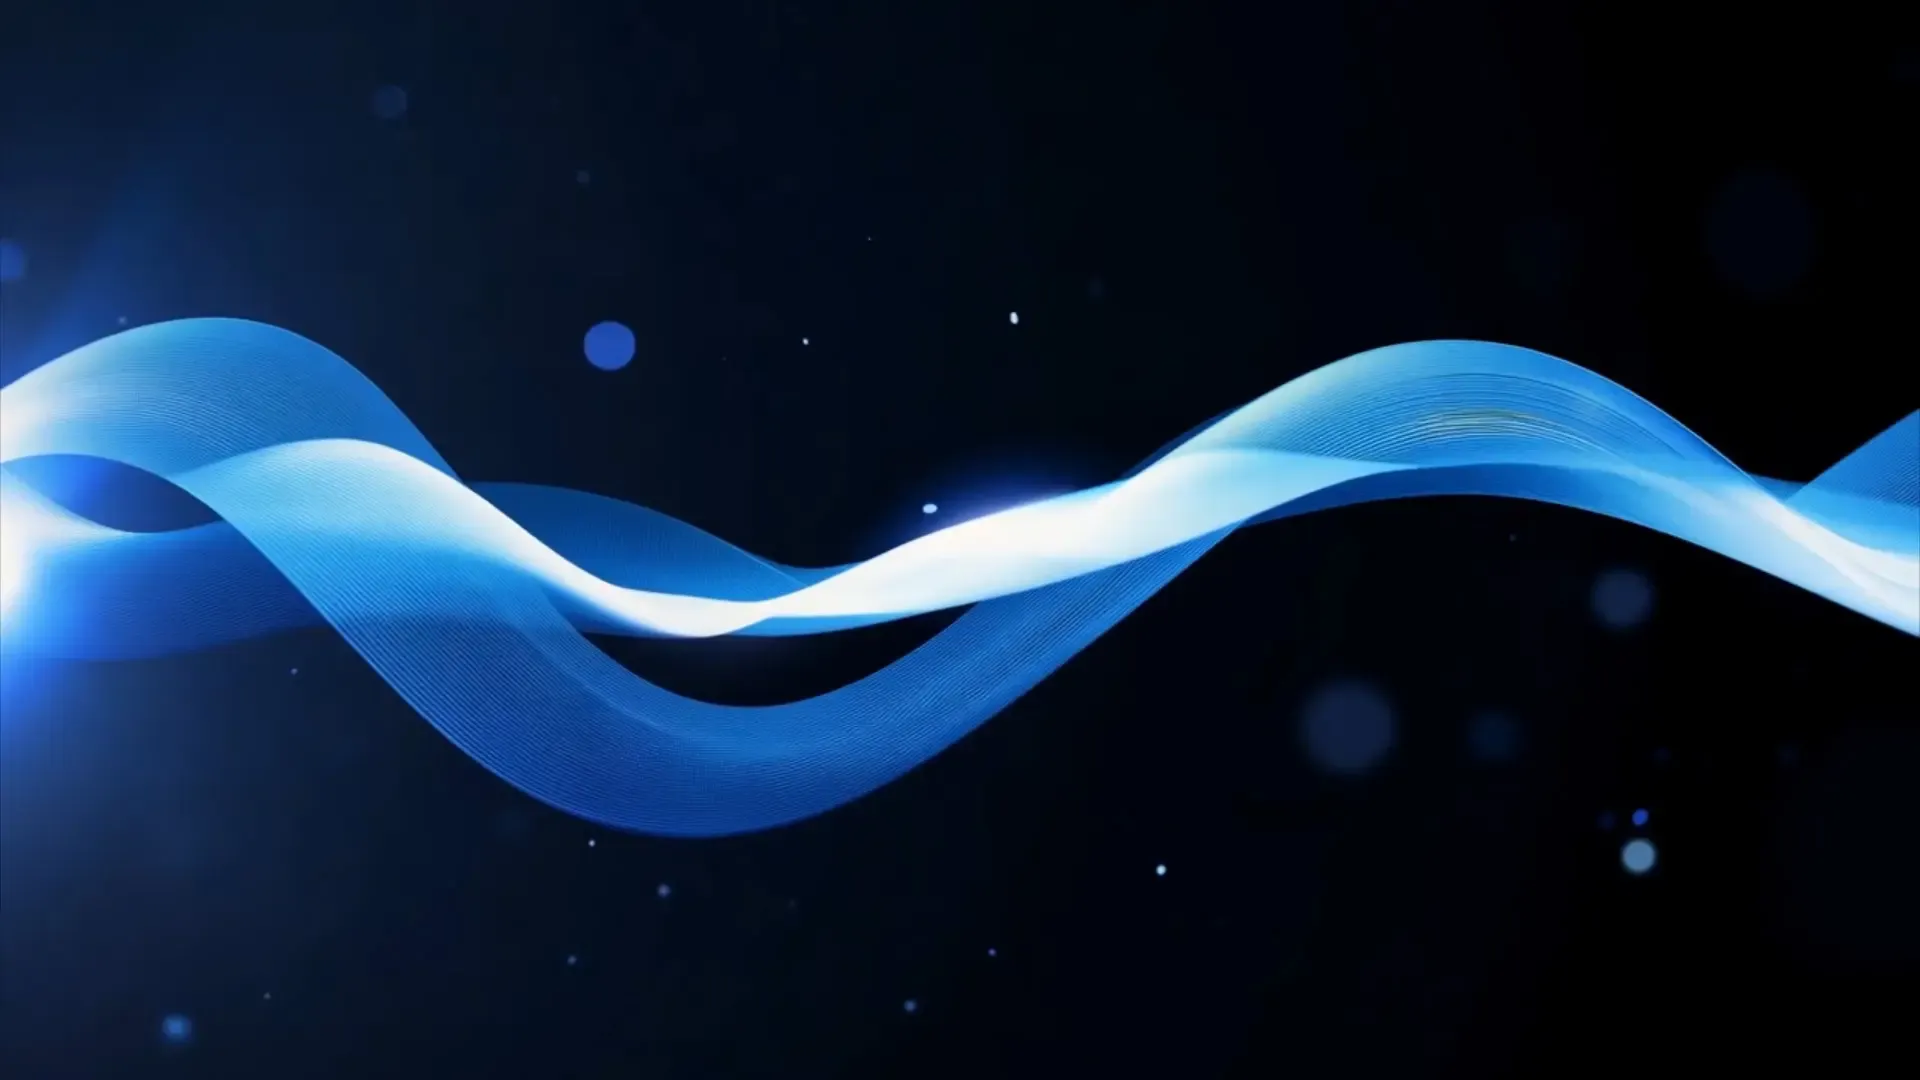 Soft Blue Light Ripple Background for Title Animation